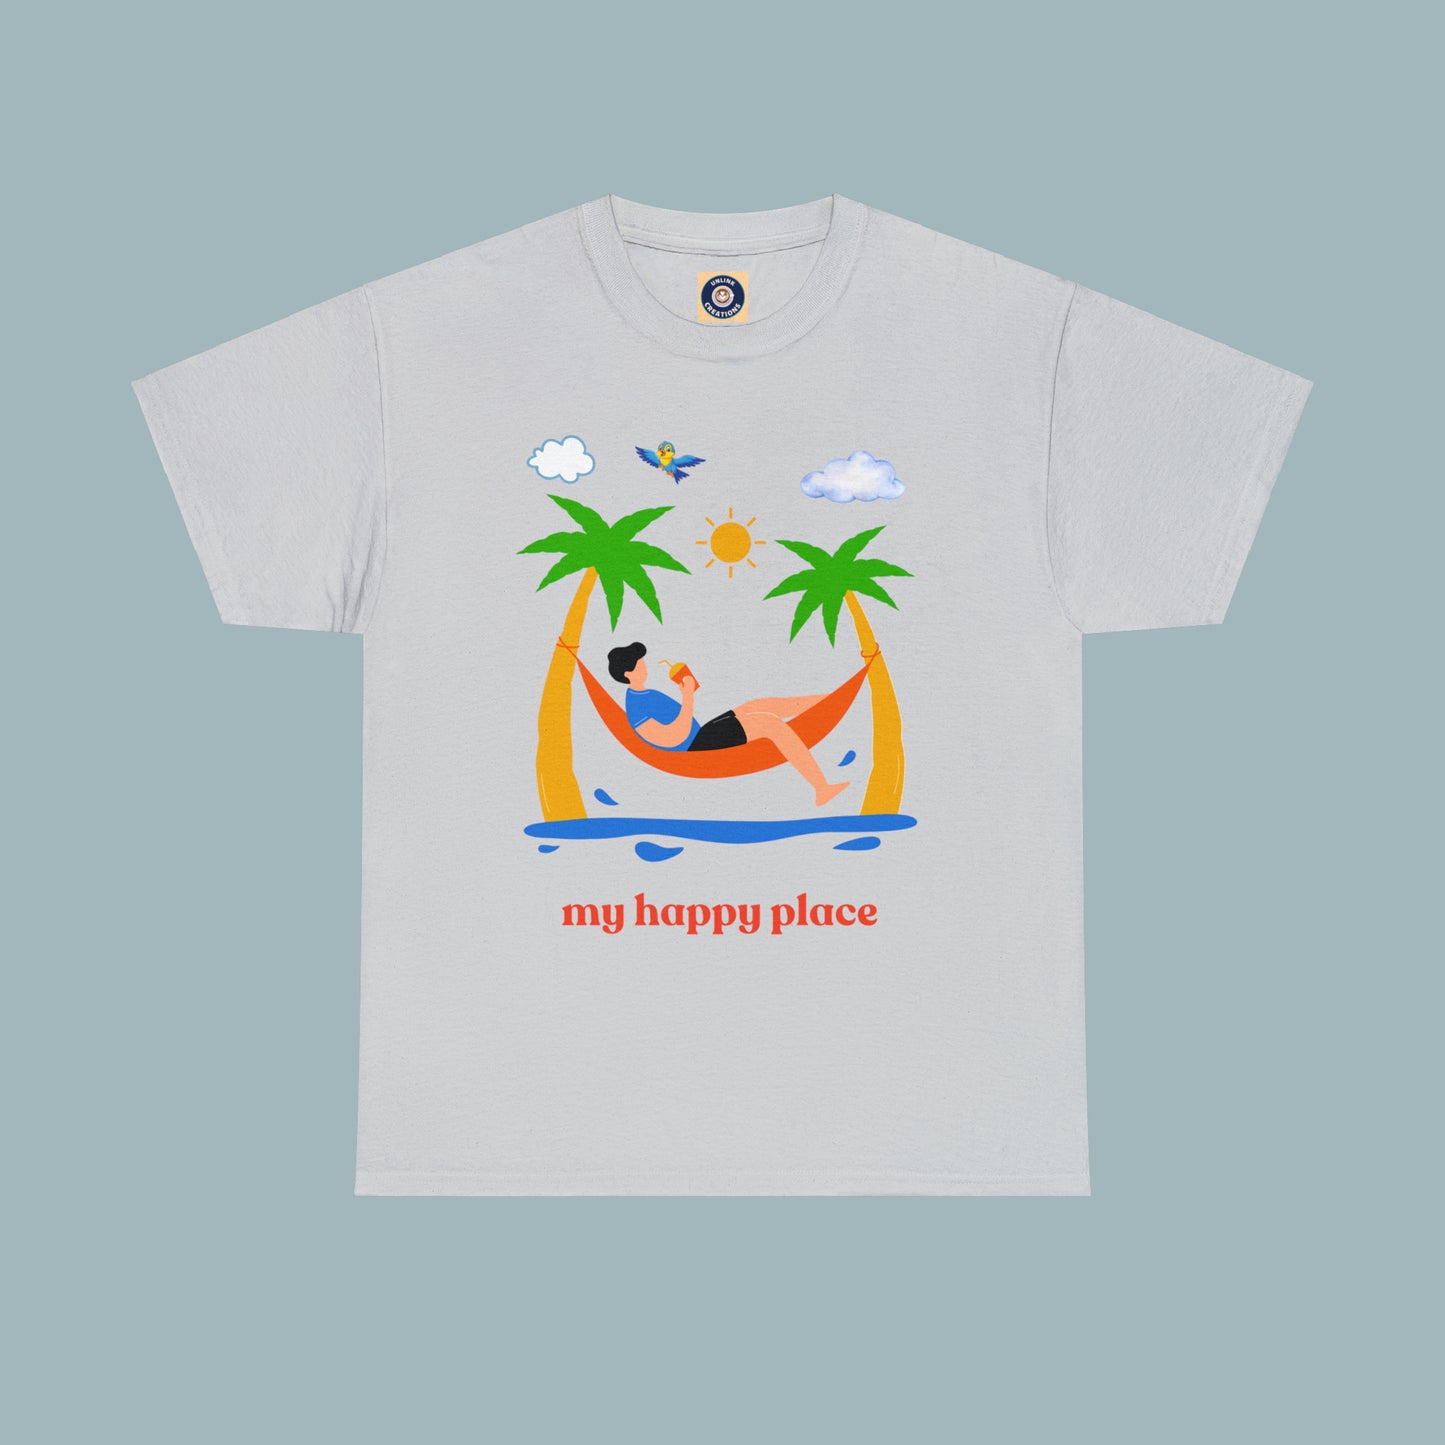 Is the beach your happy place? This is the shirt for you if it is. This Unisex Heavy Cotton Tee makes for a great gift or get one to enjoy yourself.